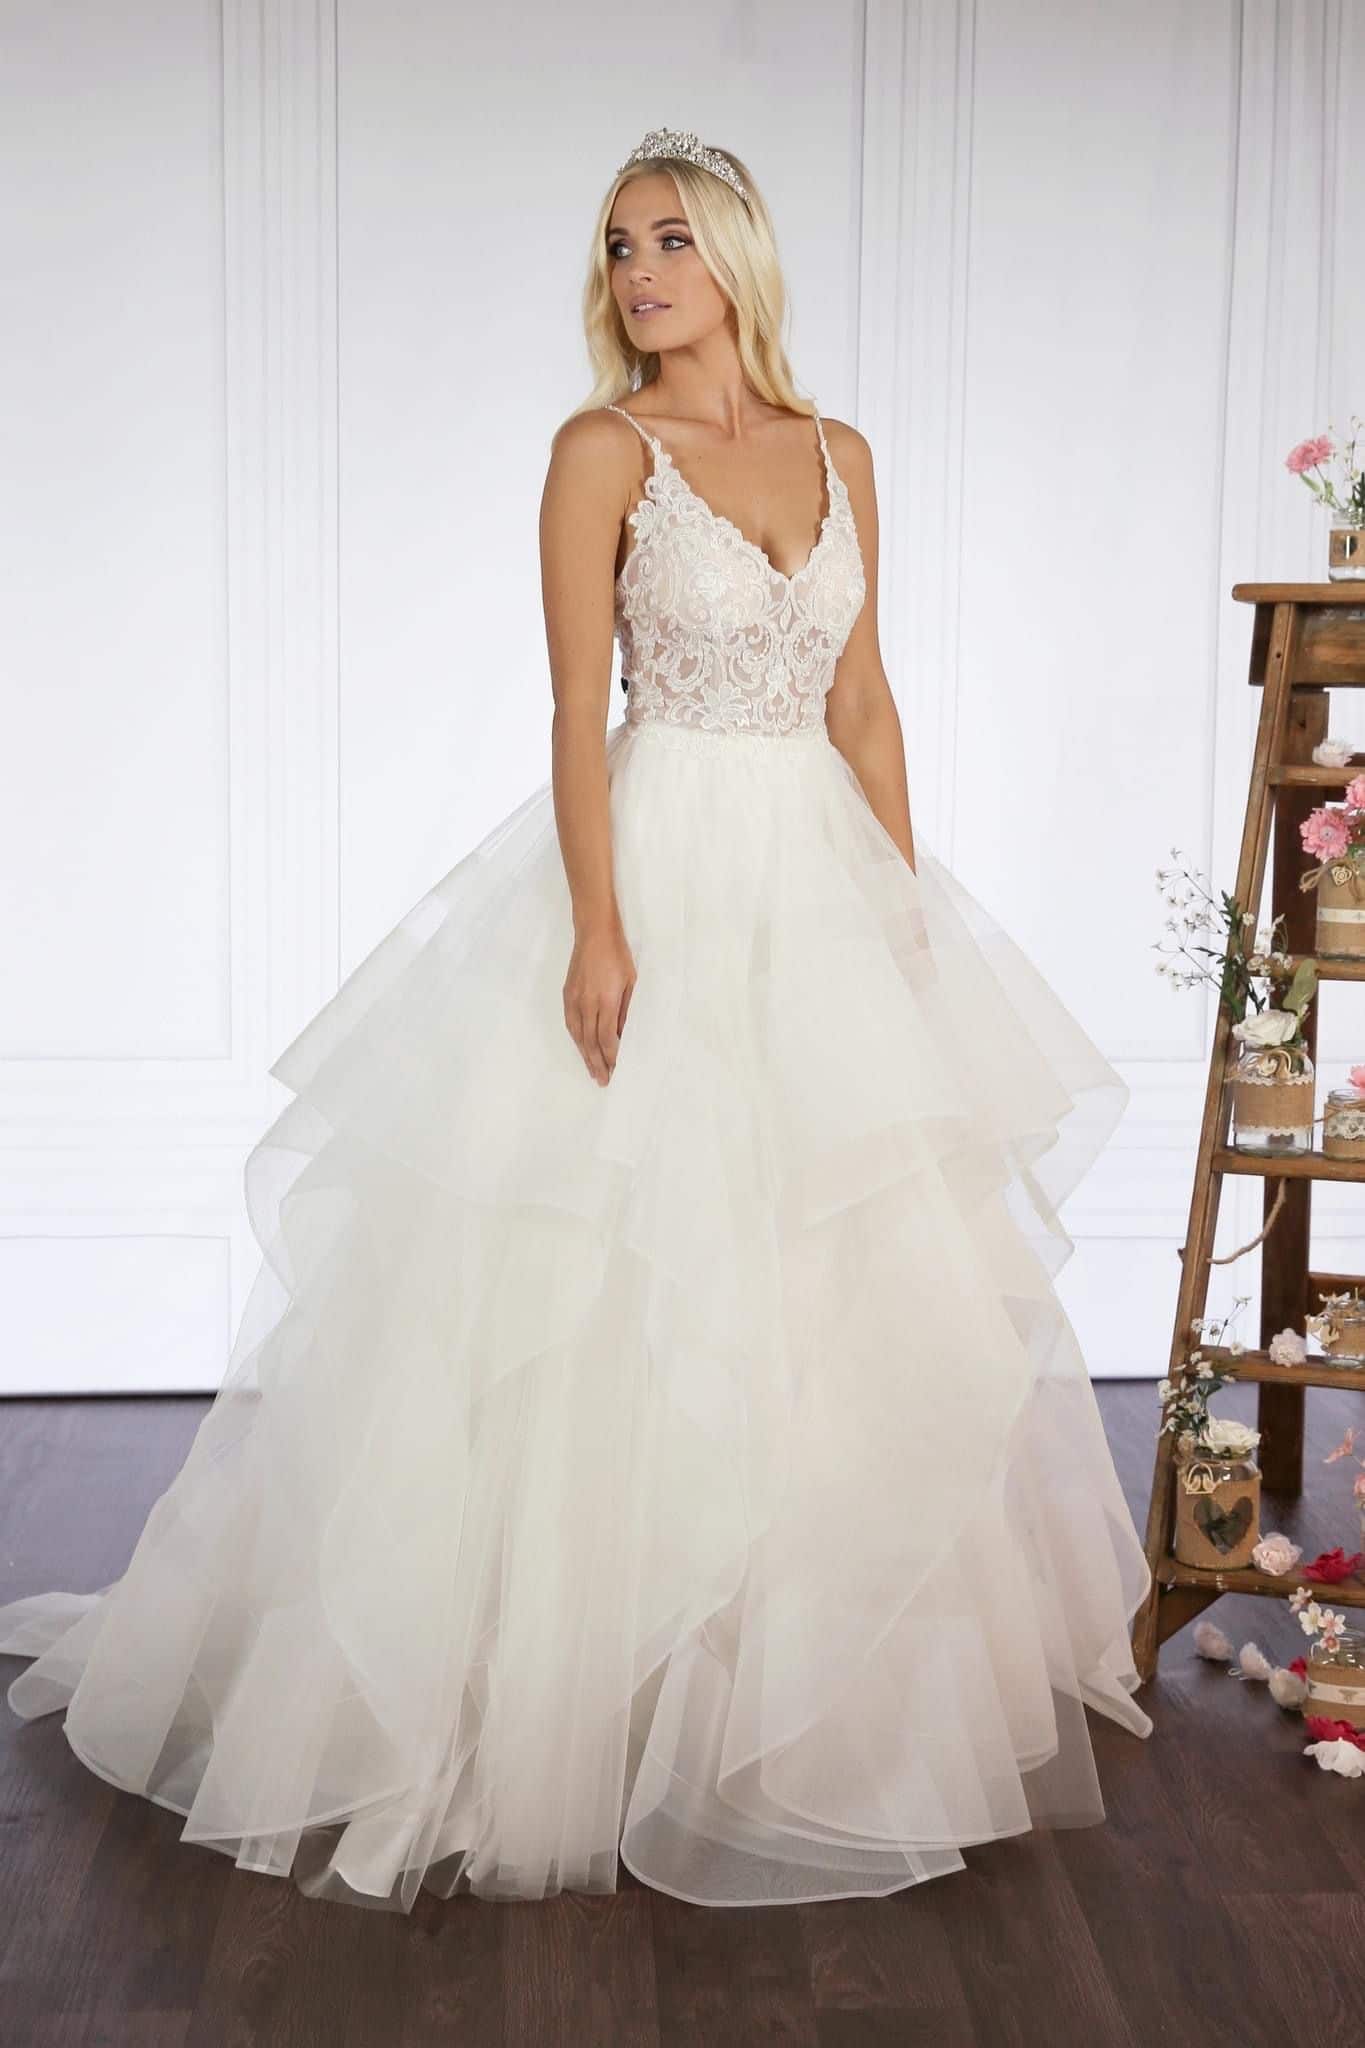 Modest Ballgown Style Wedding Dress With Beaded Lace Ruffles, Cap Sleeves,  And Button Back Chiffon Country Bridal Gop From Totallymodest, $105.29 |  DHgate.Com